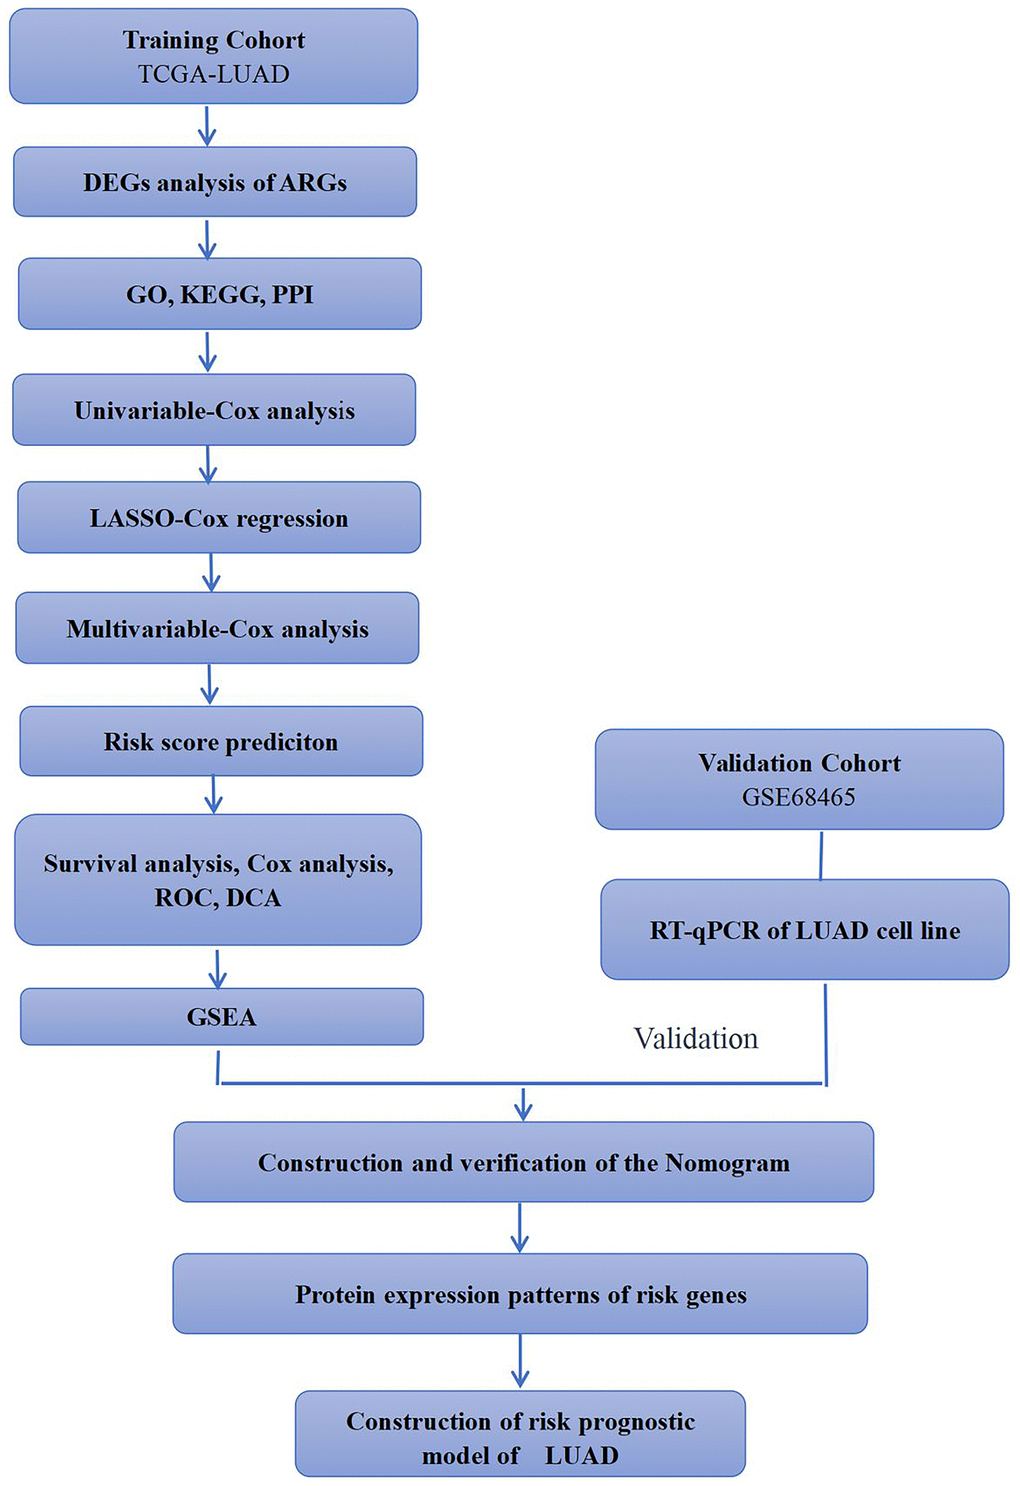 Simple flow chart of this study. TCGA-LUAD and GSE68465 cohorts were used for analysis in this study. Training cohorts were used to detect prognostic genes. Lasso regression model was used to establish prognostic signatures based on prognostic genes. We then confirmed the expression patterns of EIF2AK3 and ITGB1 in LUAD cell lines.